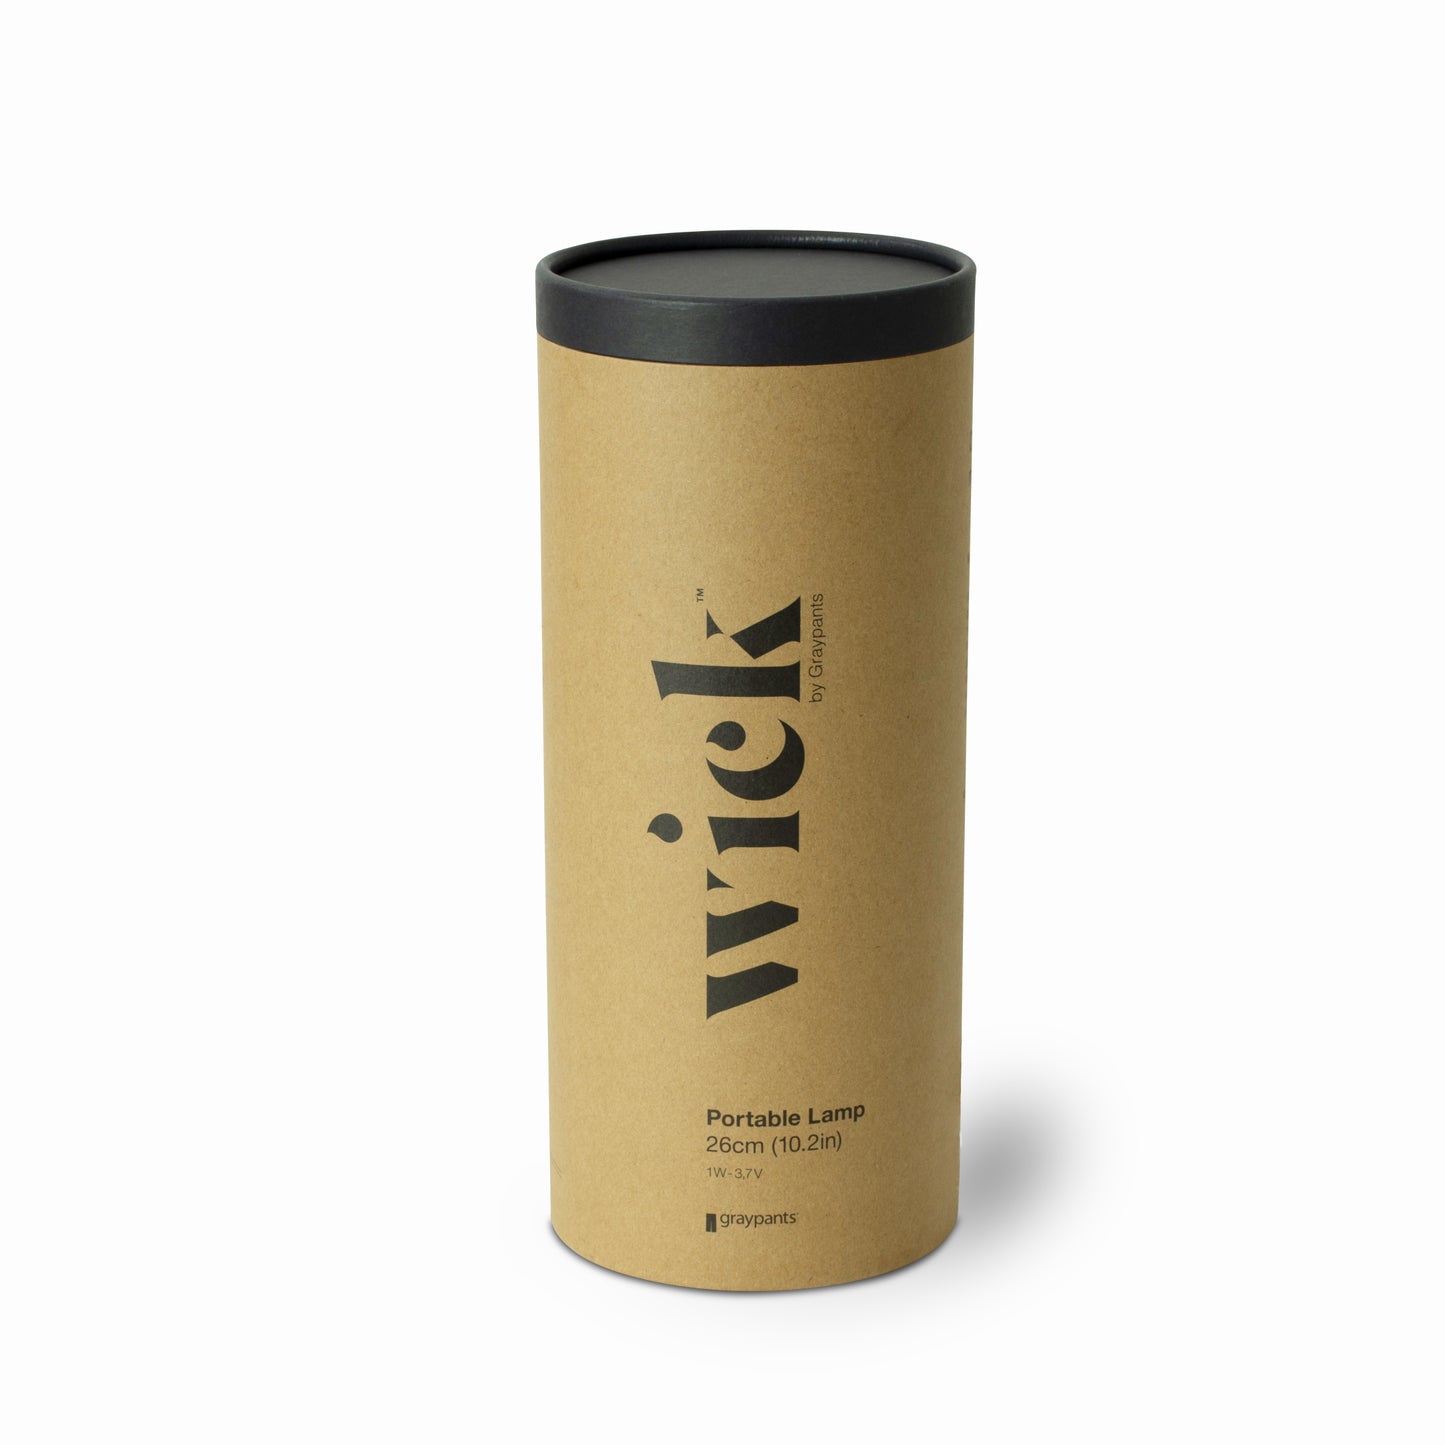 Wick Portable Lamp - Gray, Portable, and Sustainable